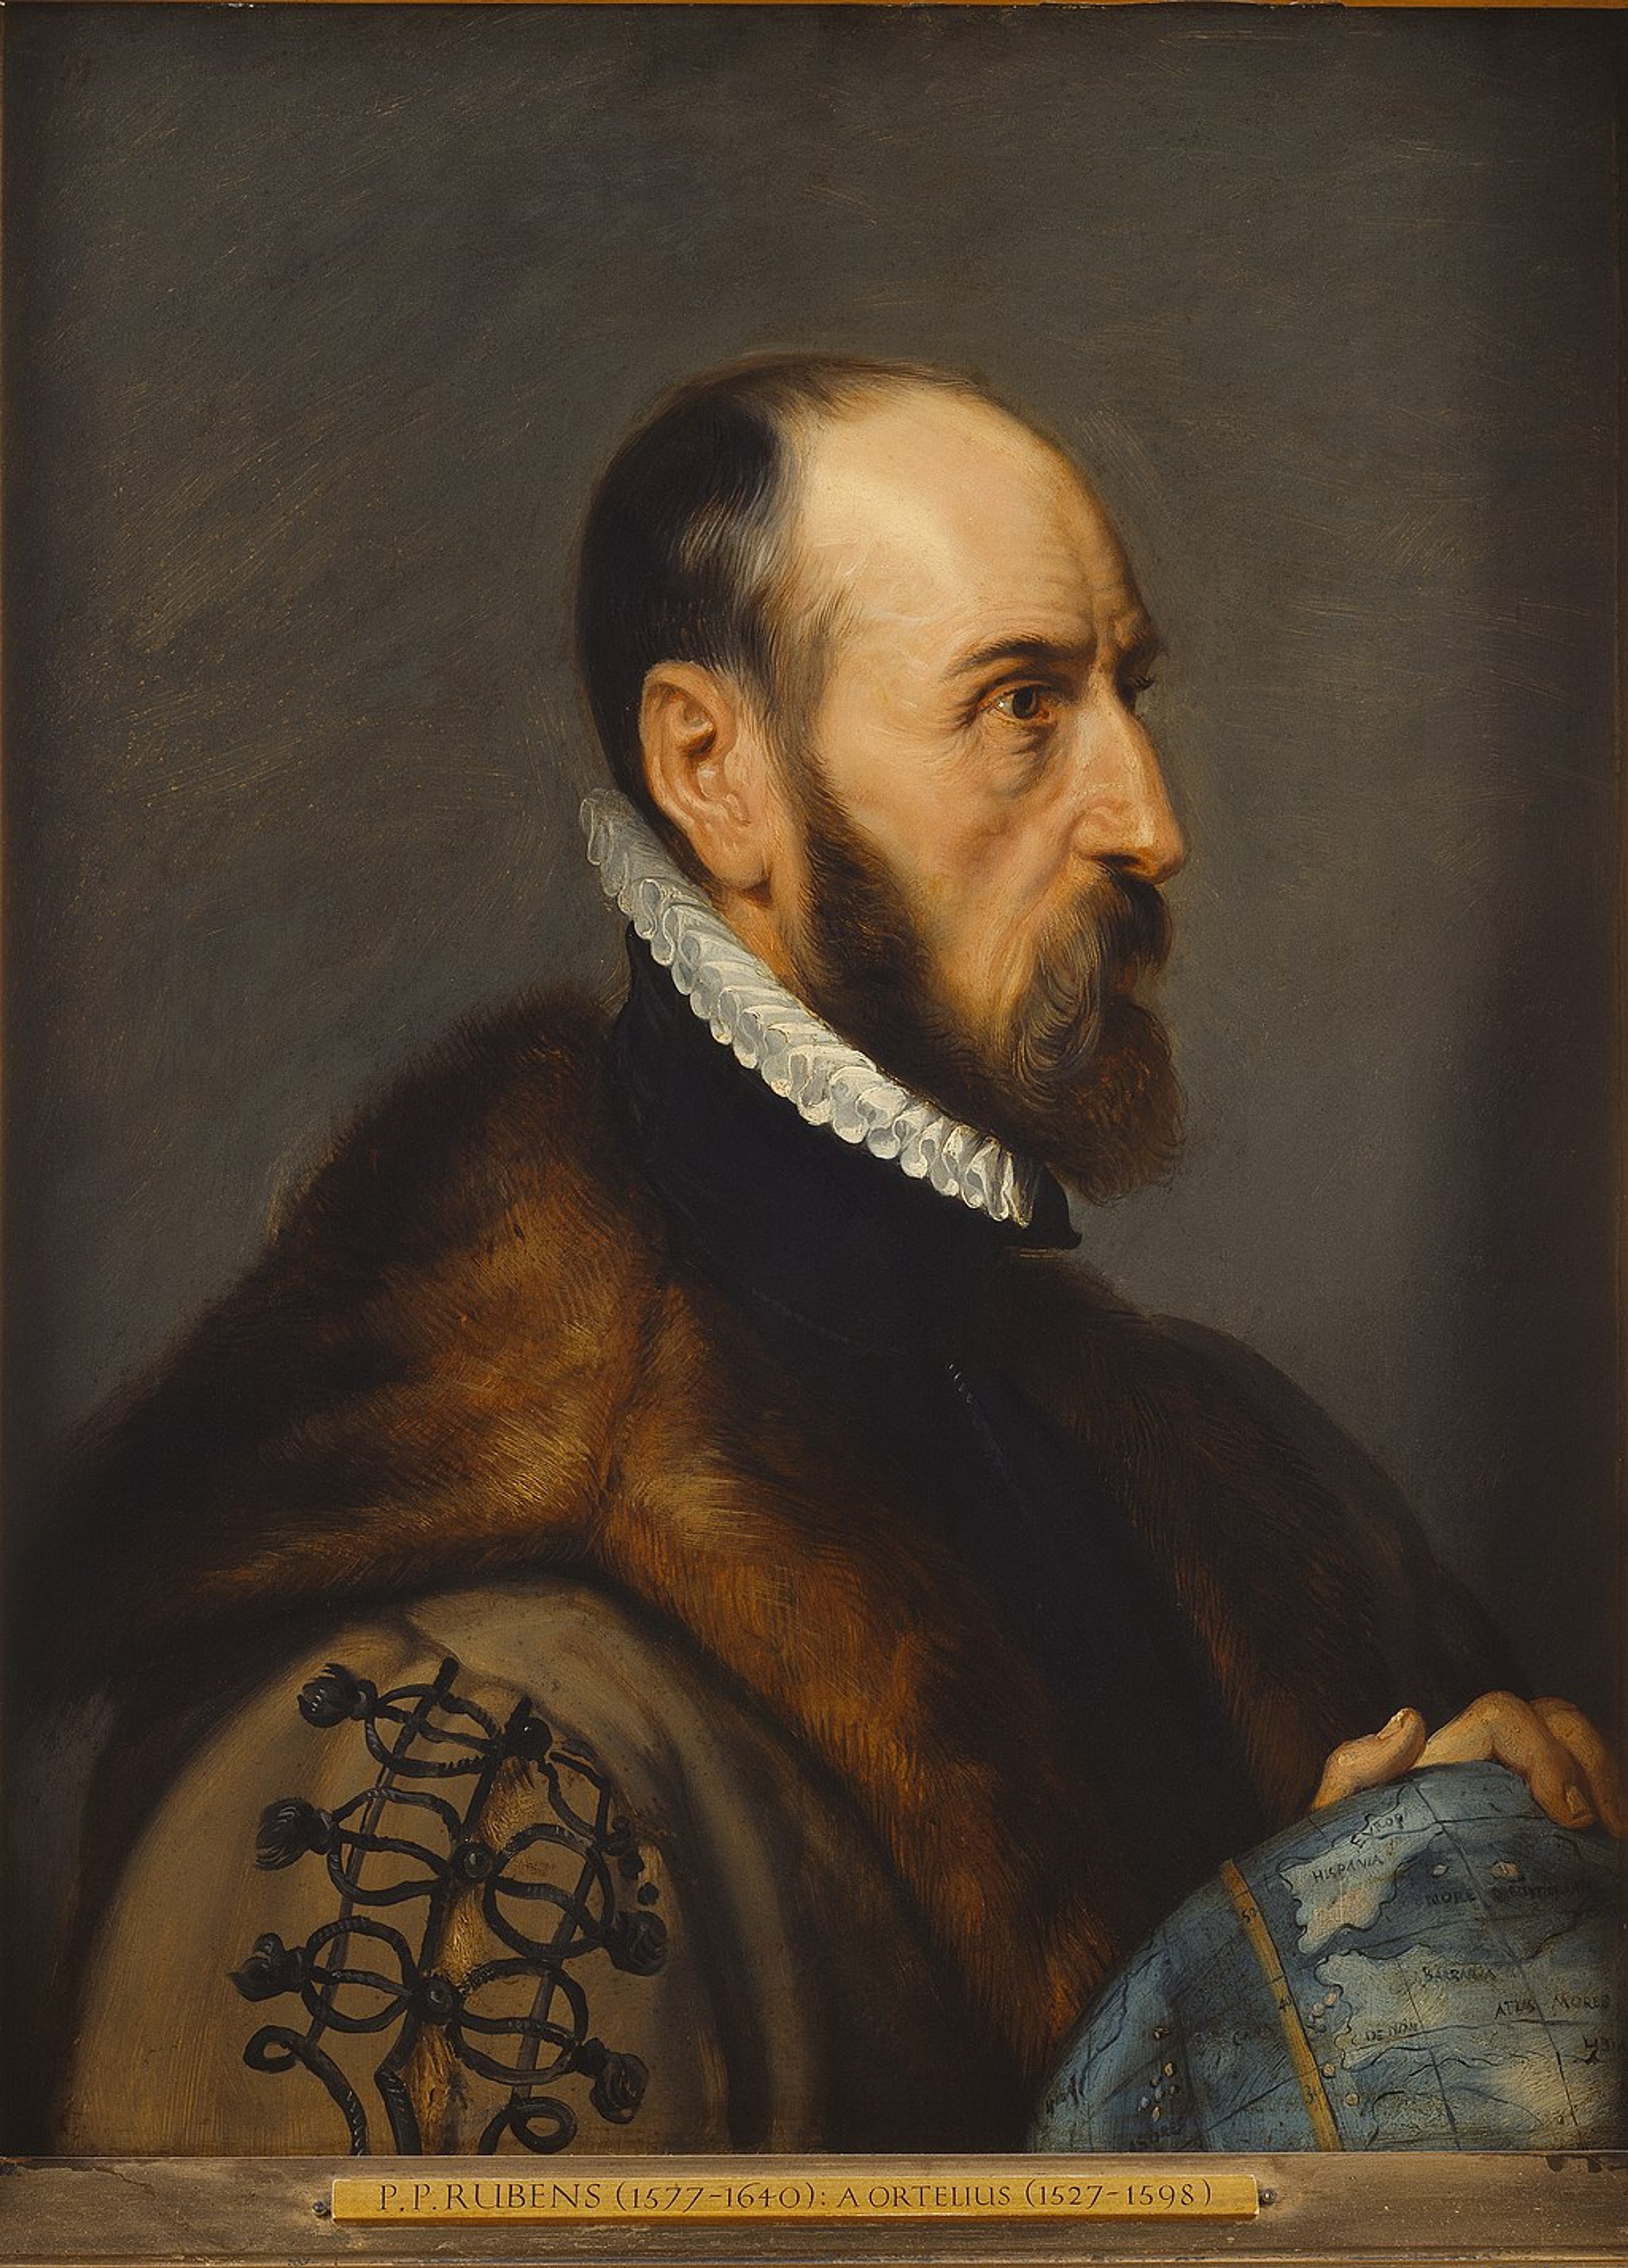 Colourful side profile portrait of Abraham Ortelius, a man with very short hair and holding a globe.